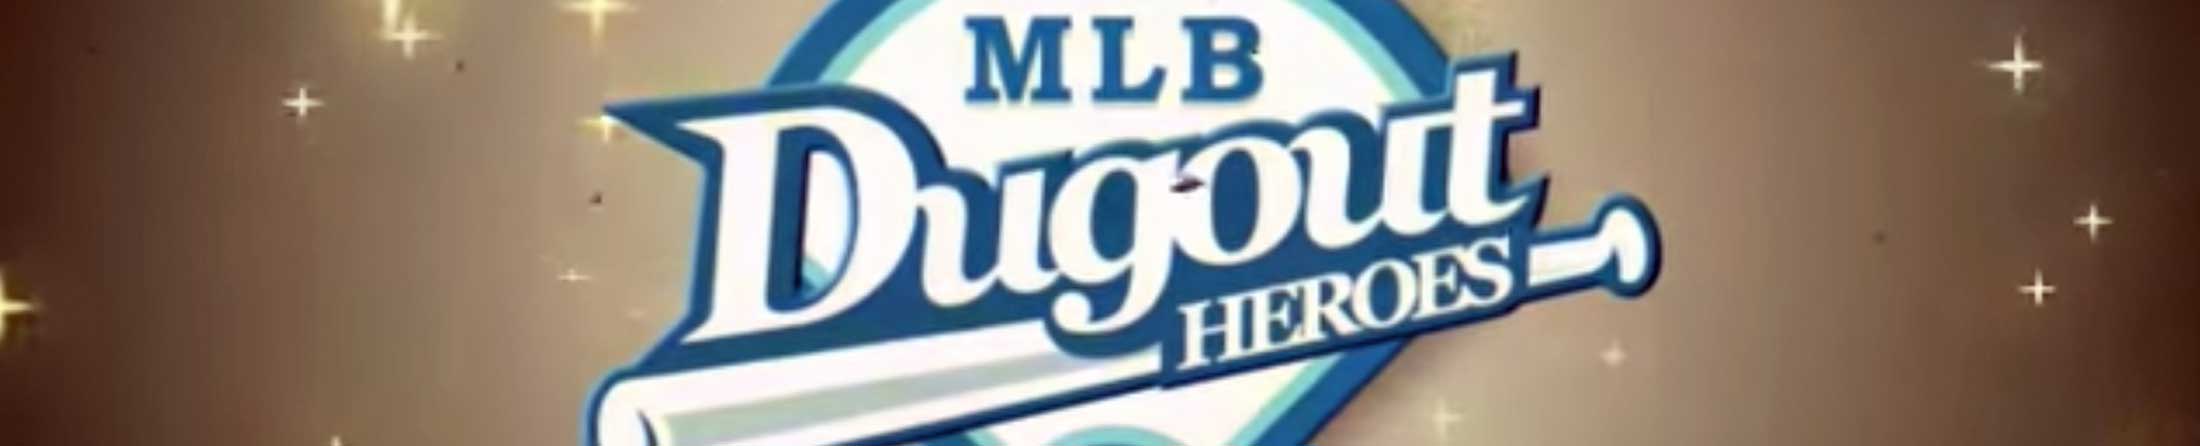 mlb dugout heroes gamescampus